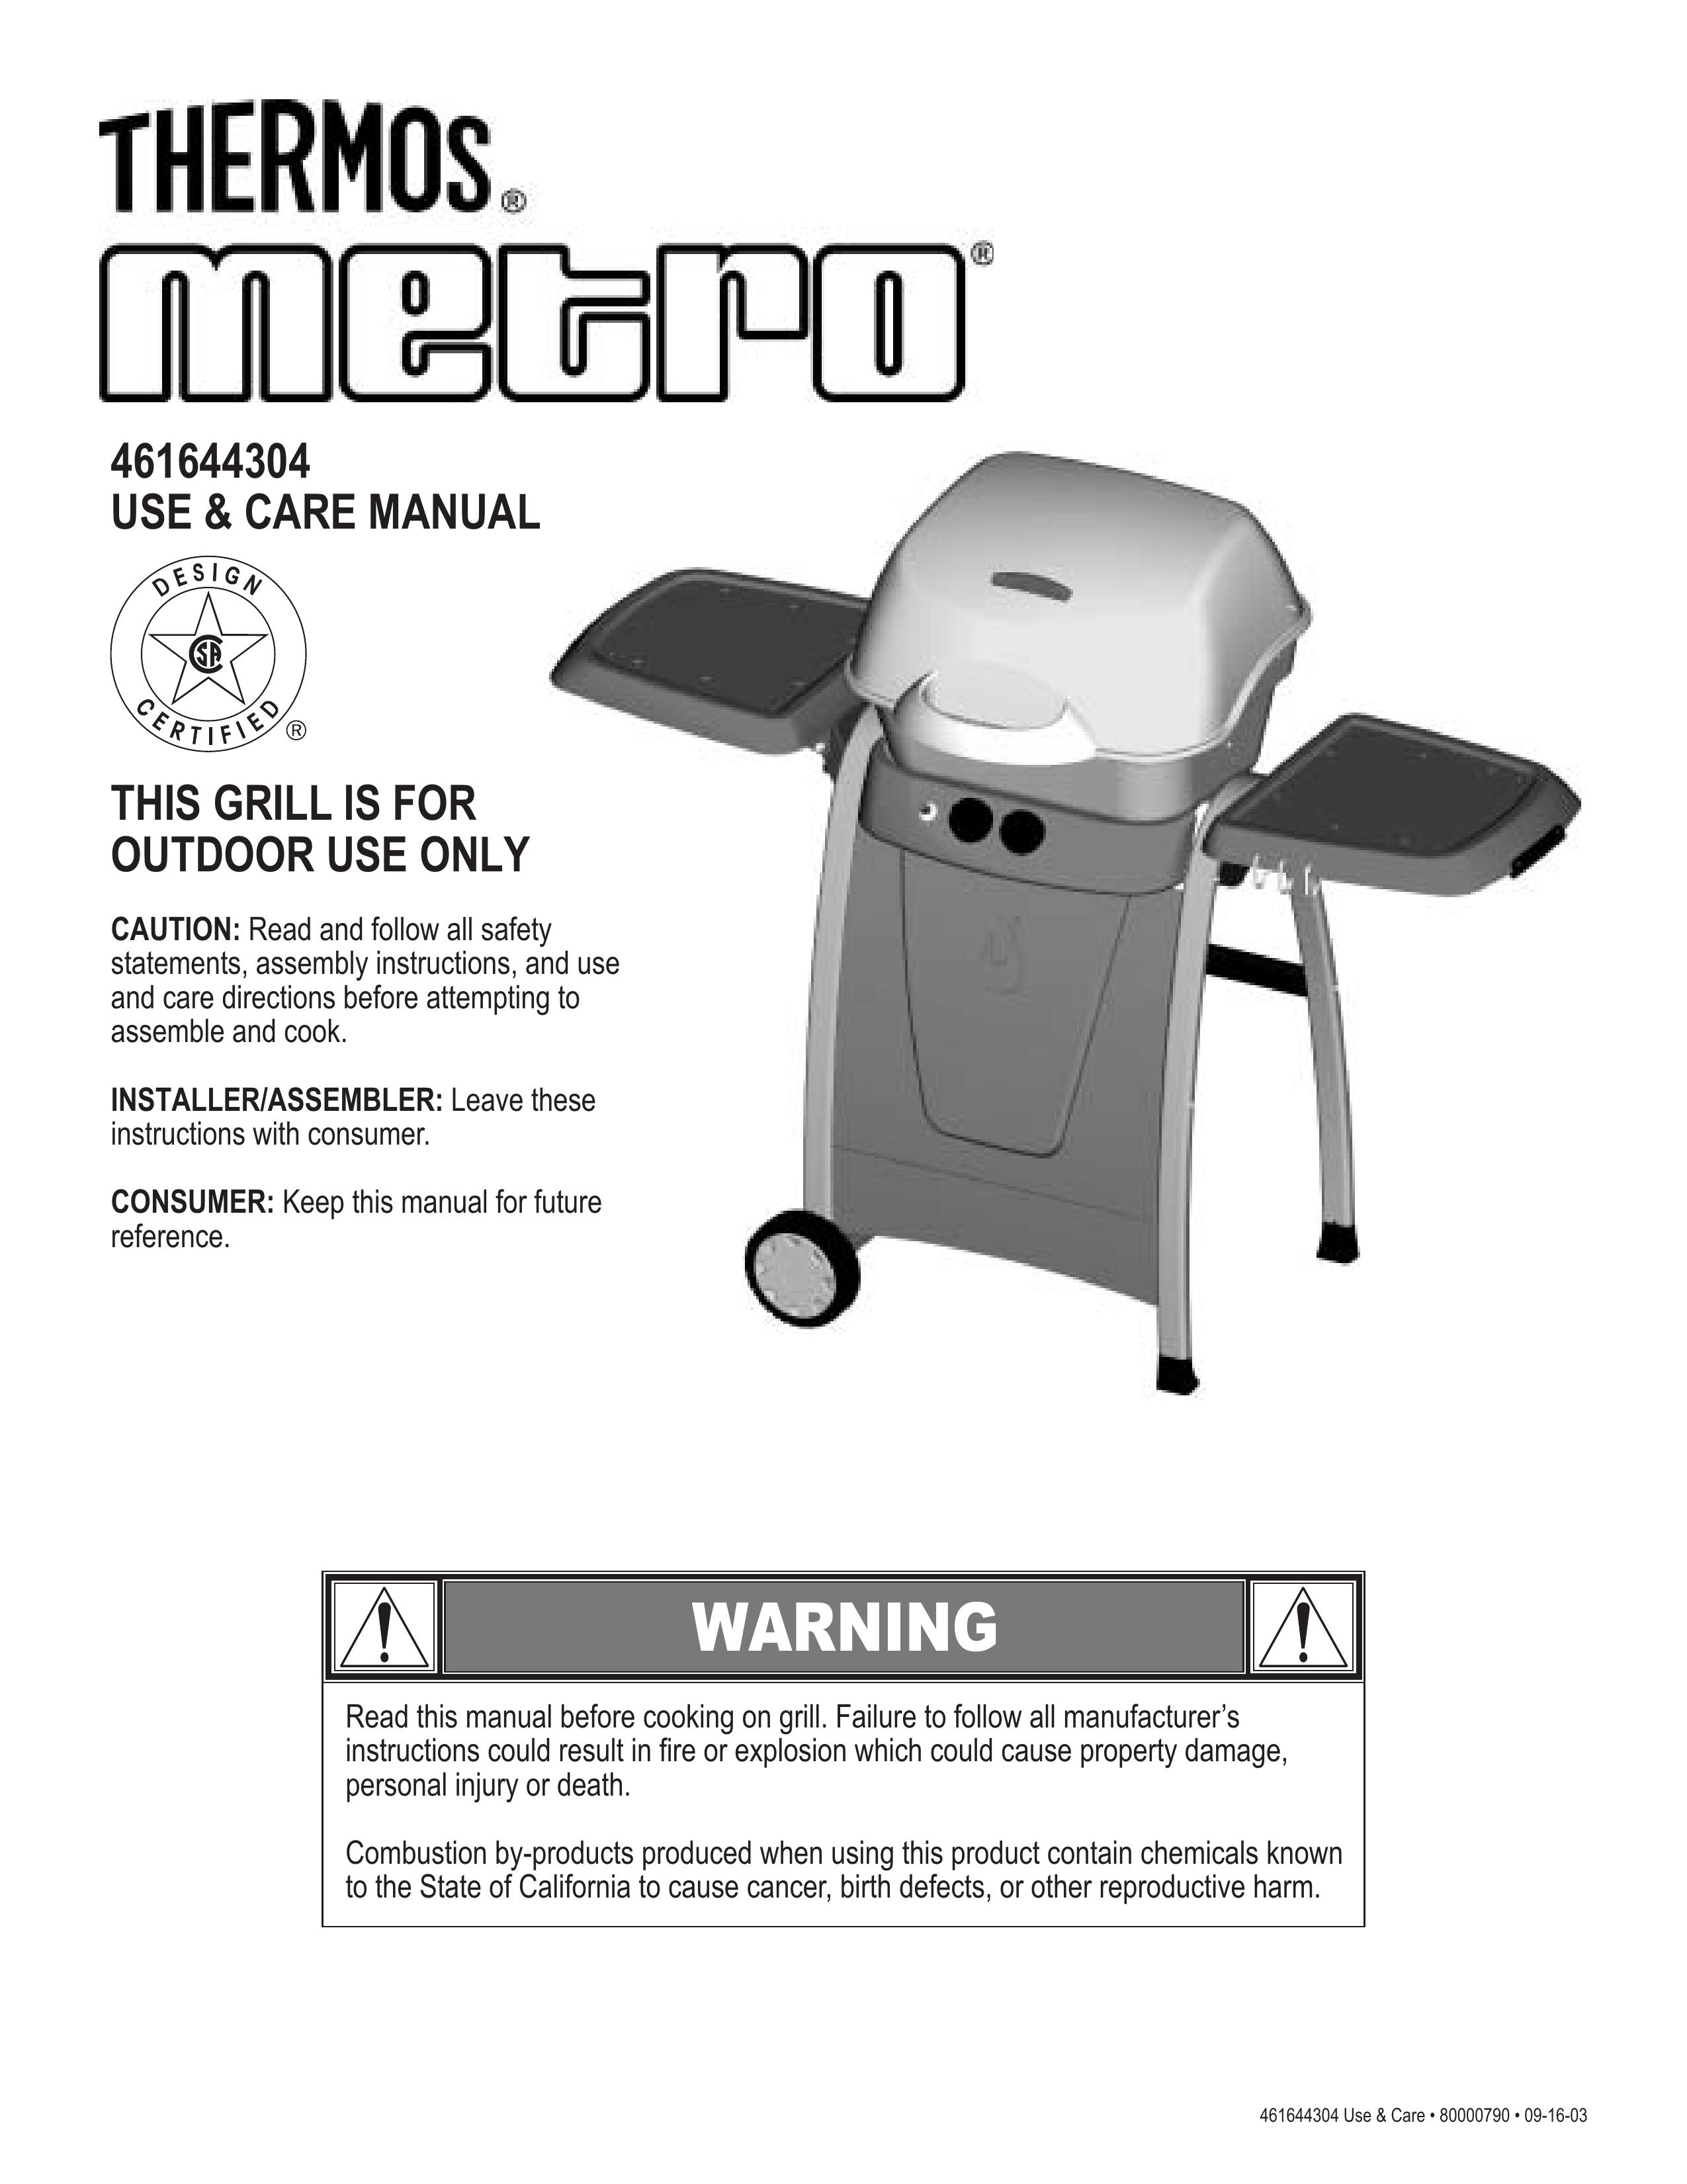 Thermos 461644304 Gas Grill User Manual